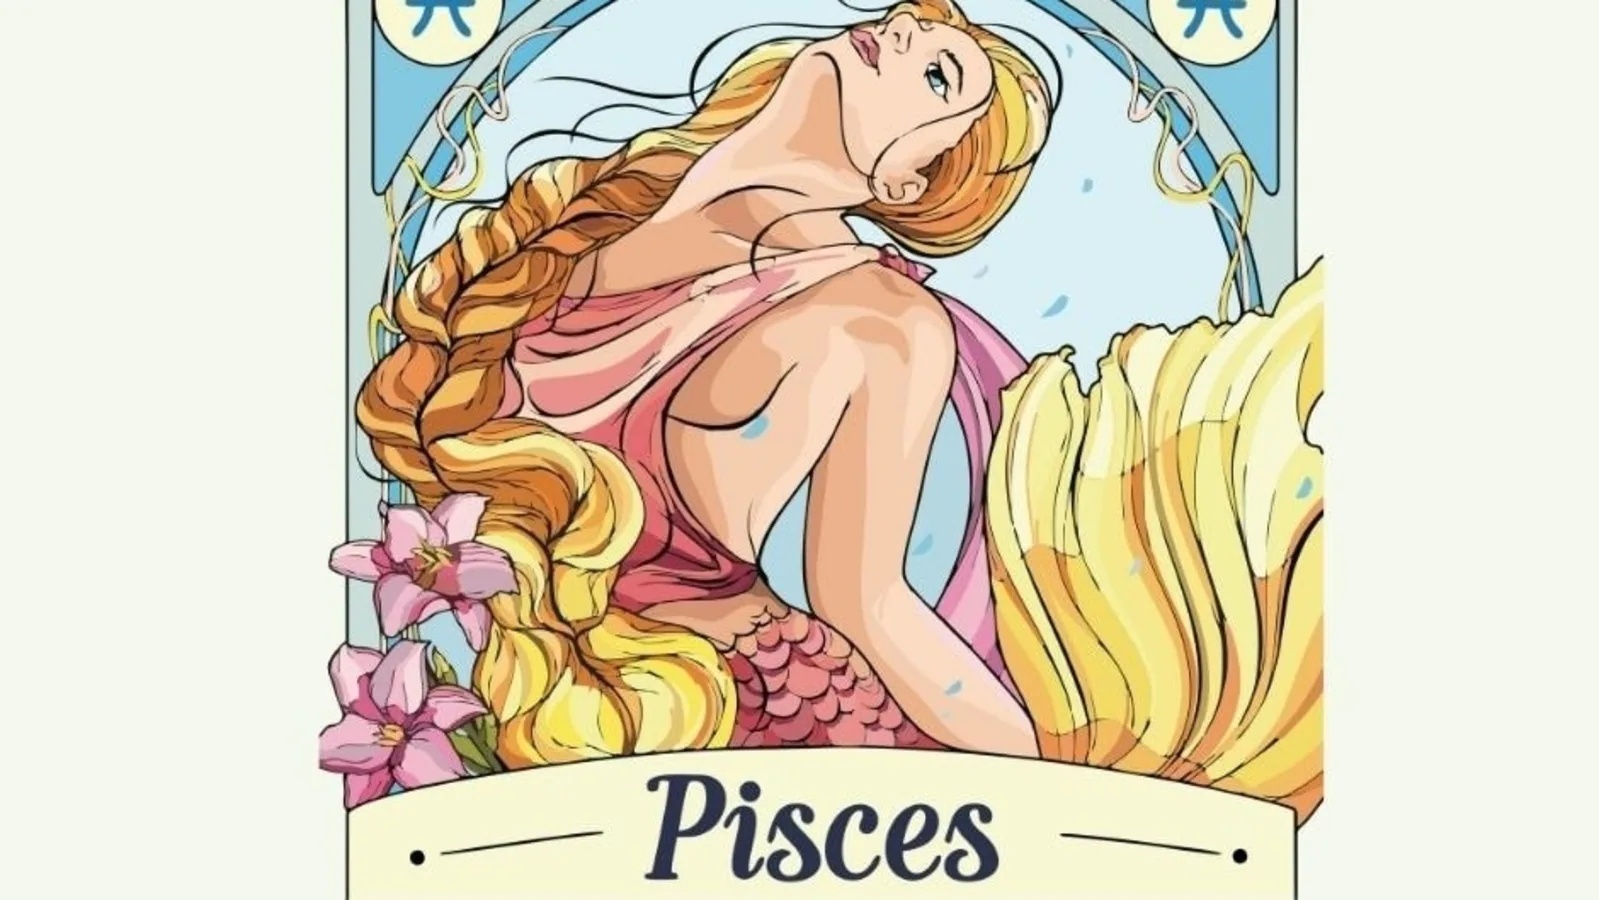 Pisces Horoscope Today: Daily Astrological Predictions for May 15, 2022